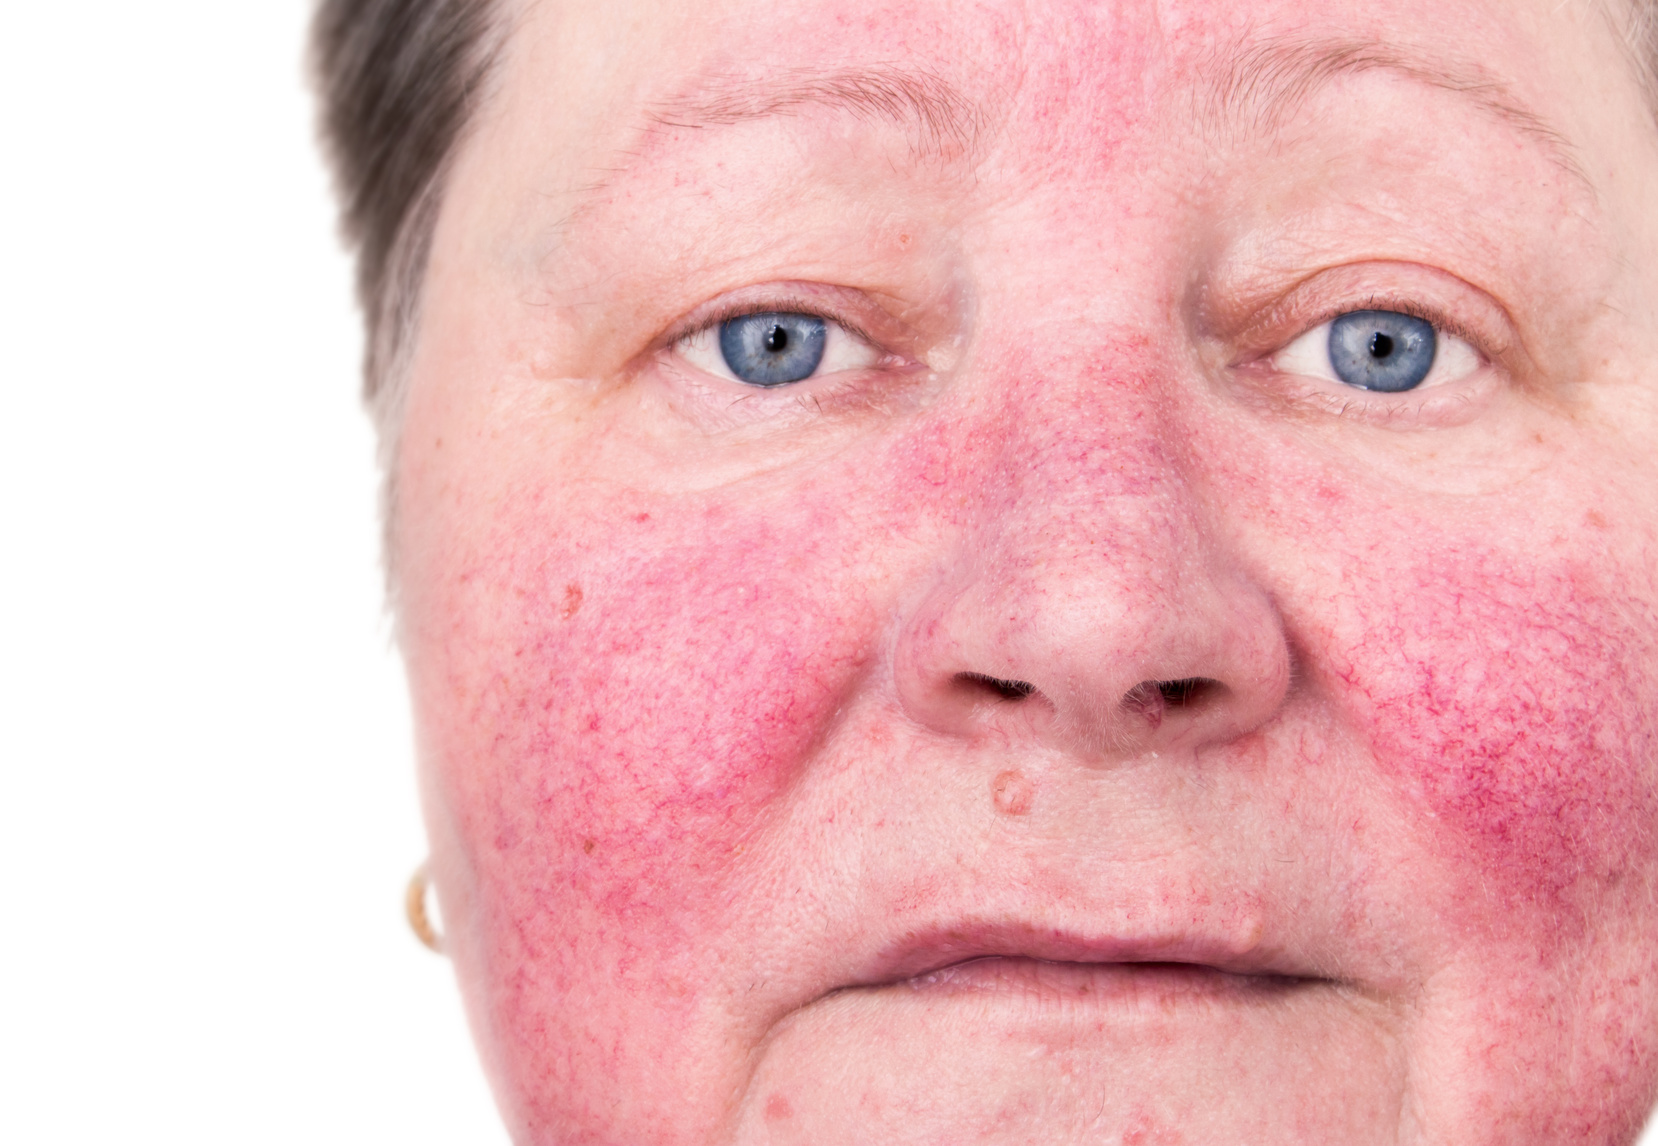 Curing Acne Rosacea, Improving Overall Health